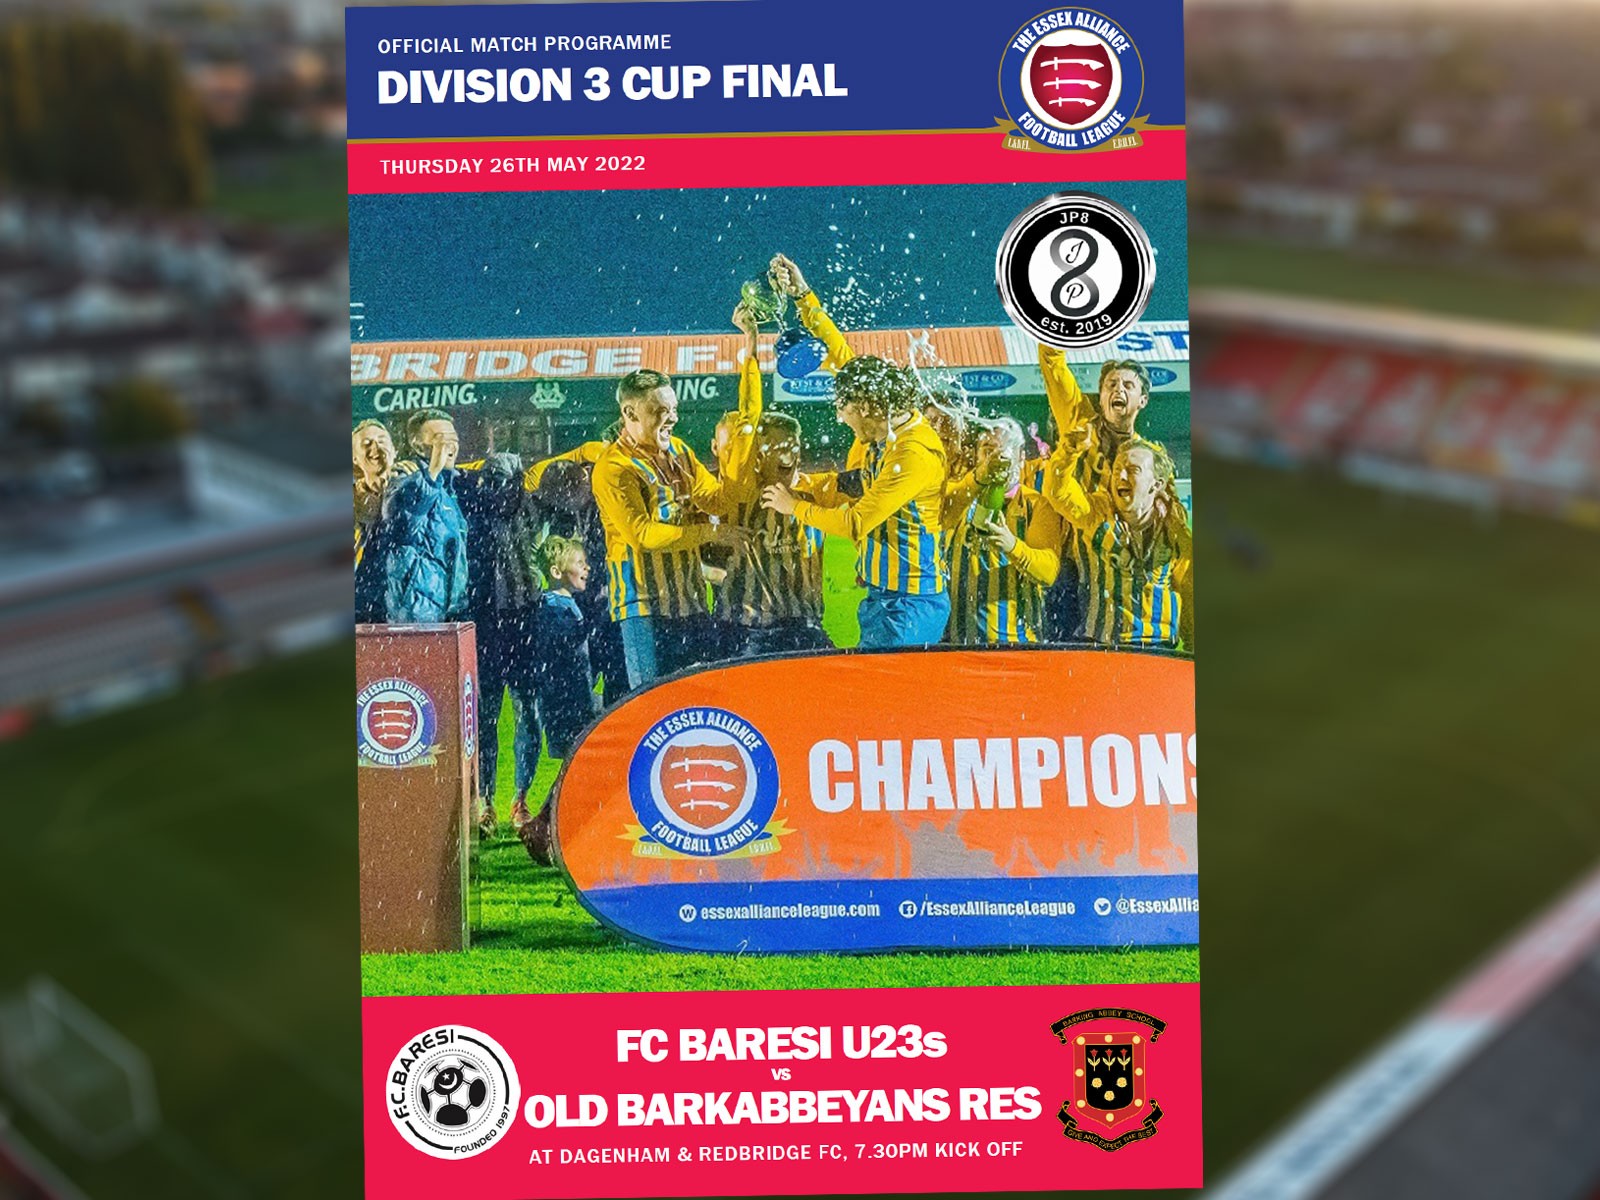 FC Baresi and Old Barkabbeyans battle for Division 3 Cup this Thursday